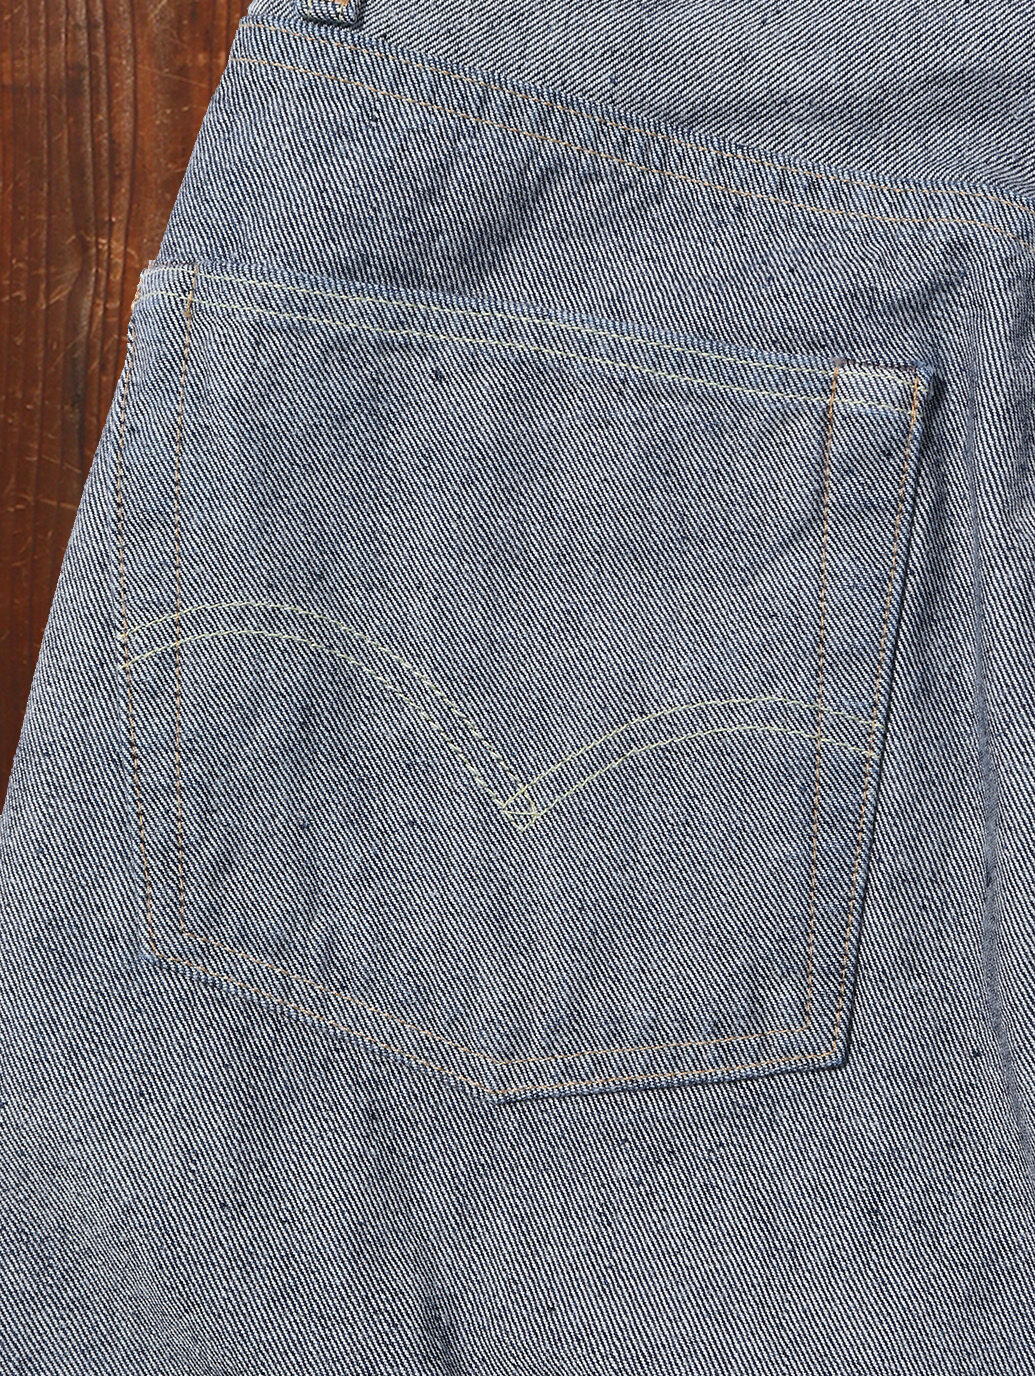 LIMITED EDITIONLEVI'S® VINTAGE CLOTHING INSIDE OUT 501 